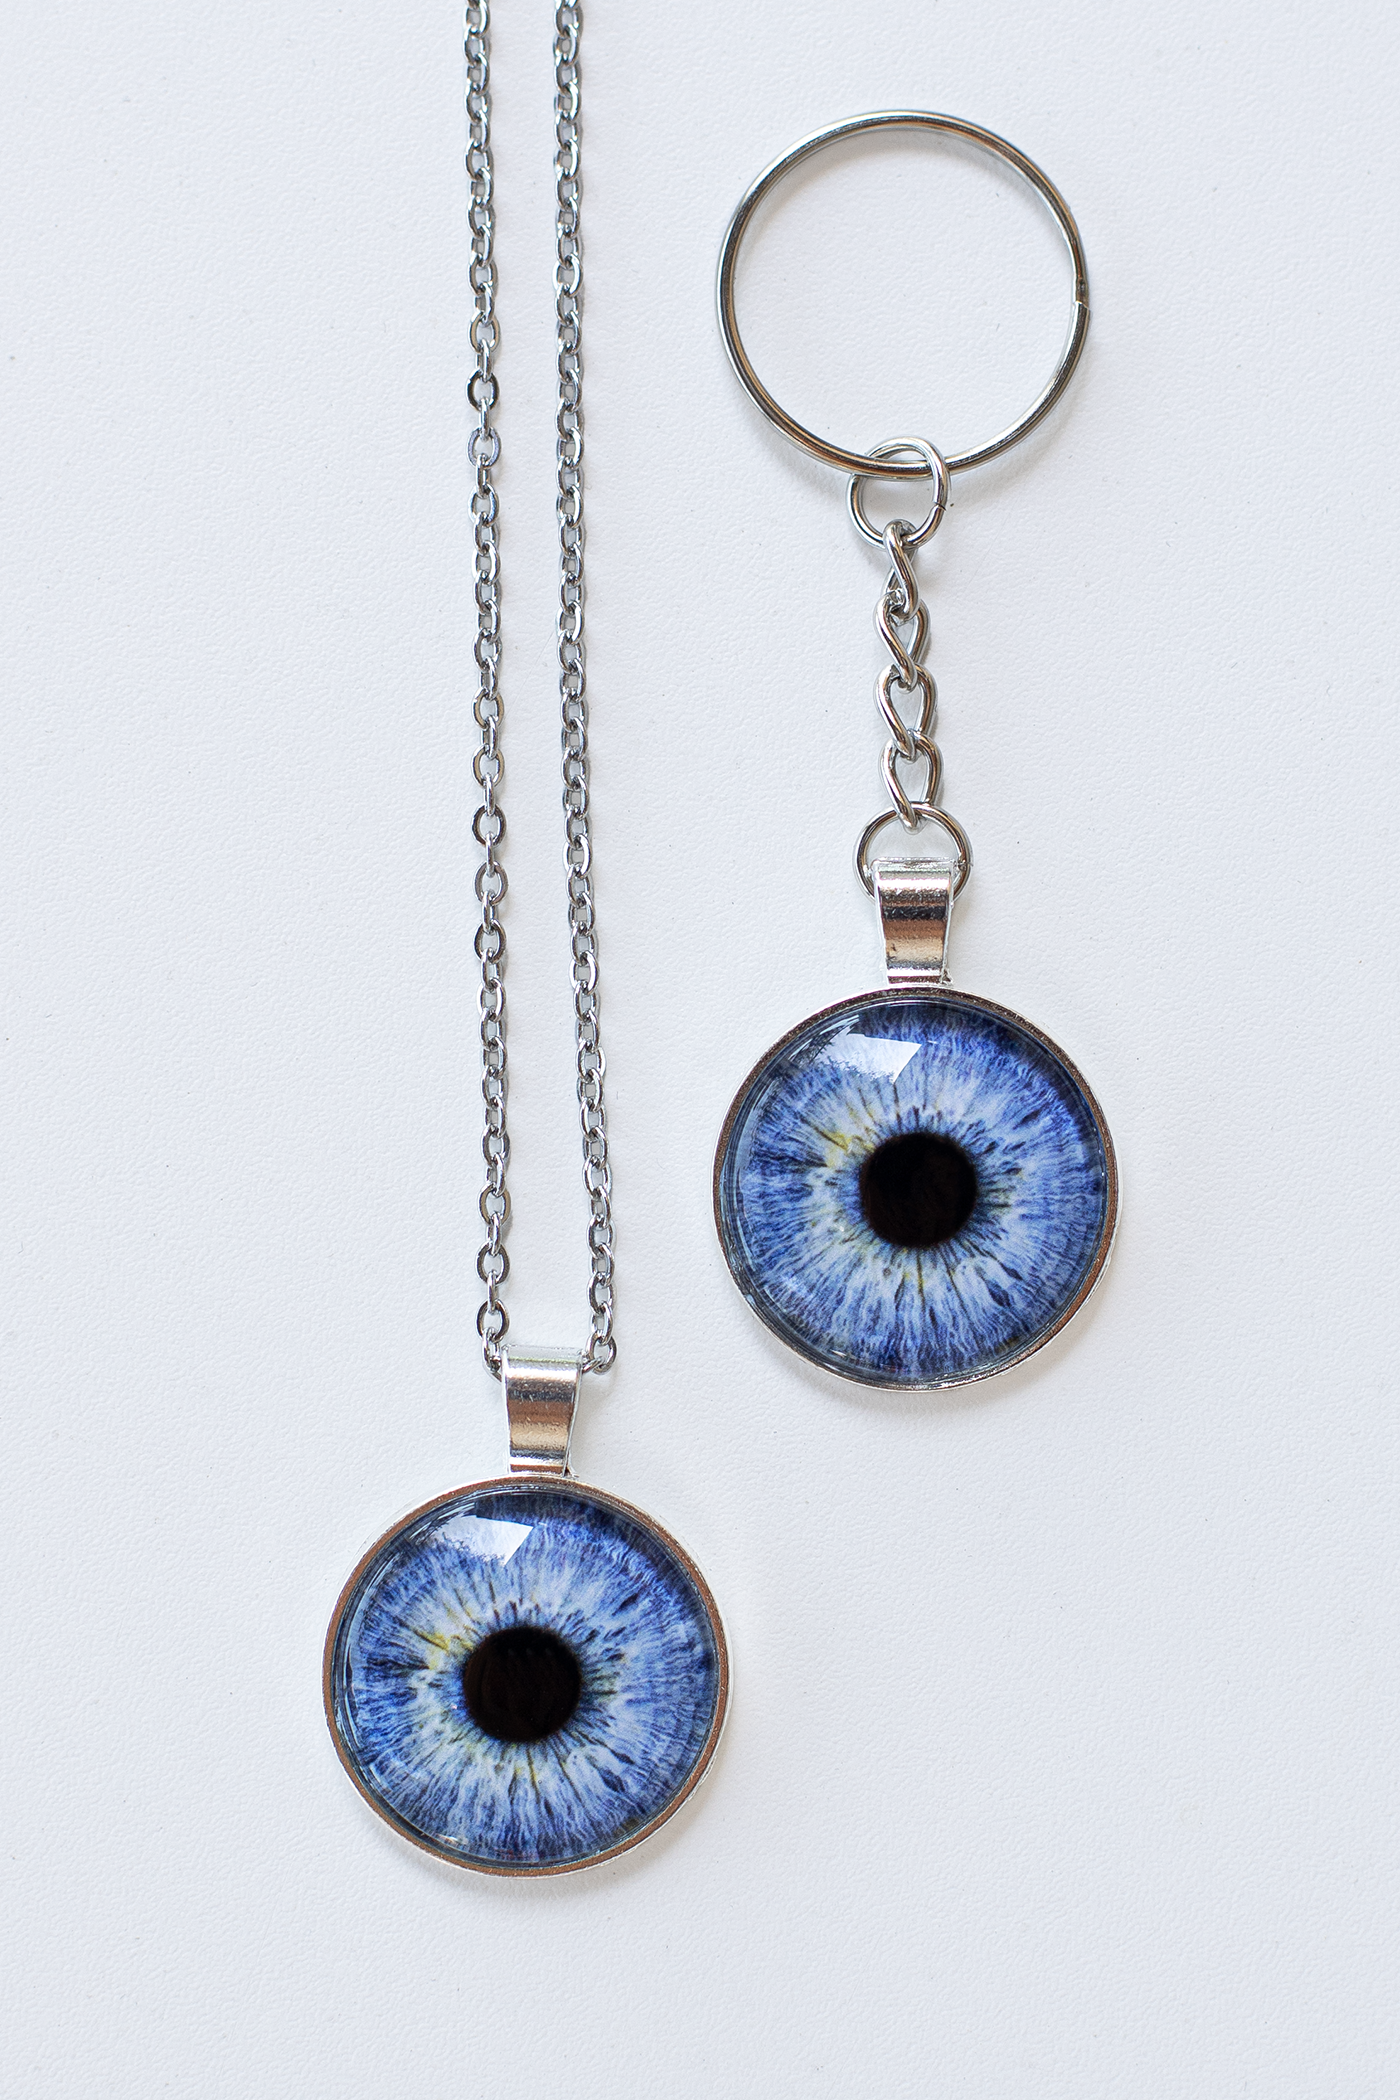 Silver Iris Keychain and Silver Iris Necklace